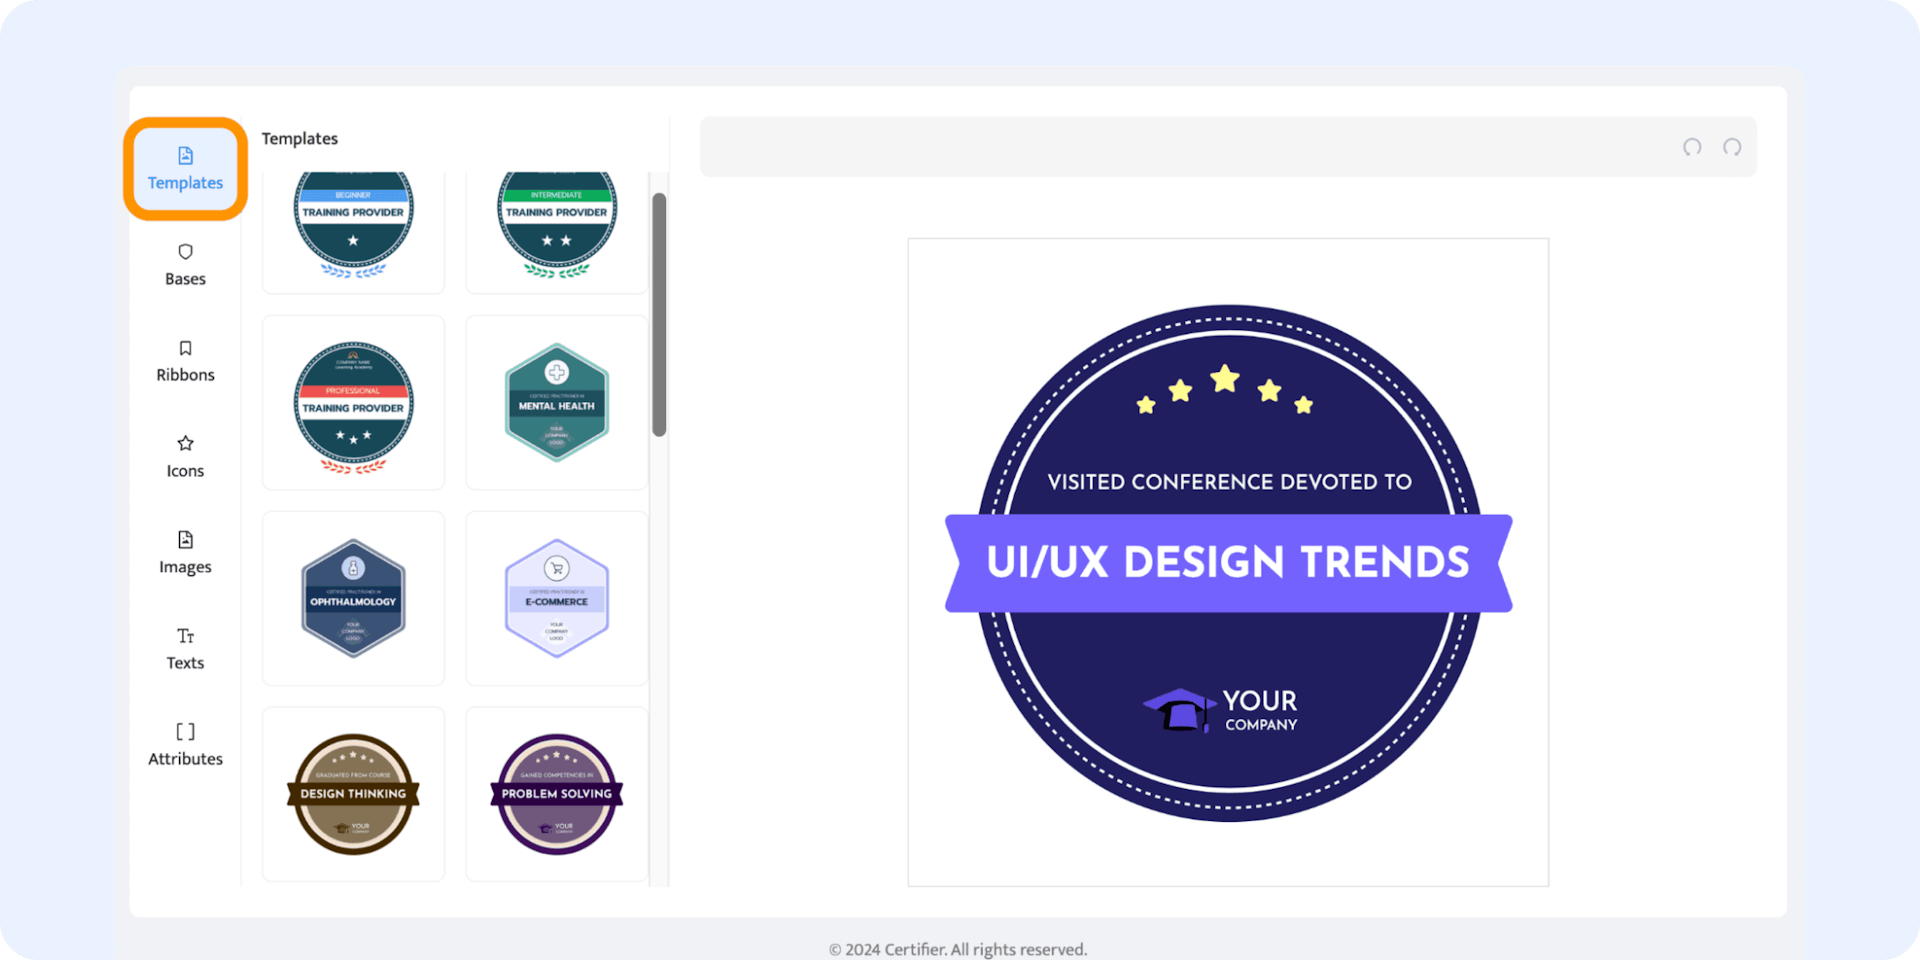 Choosing the badge design template to start creating badges.